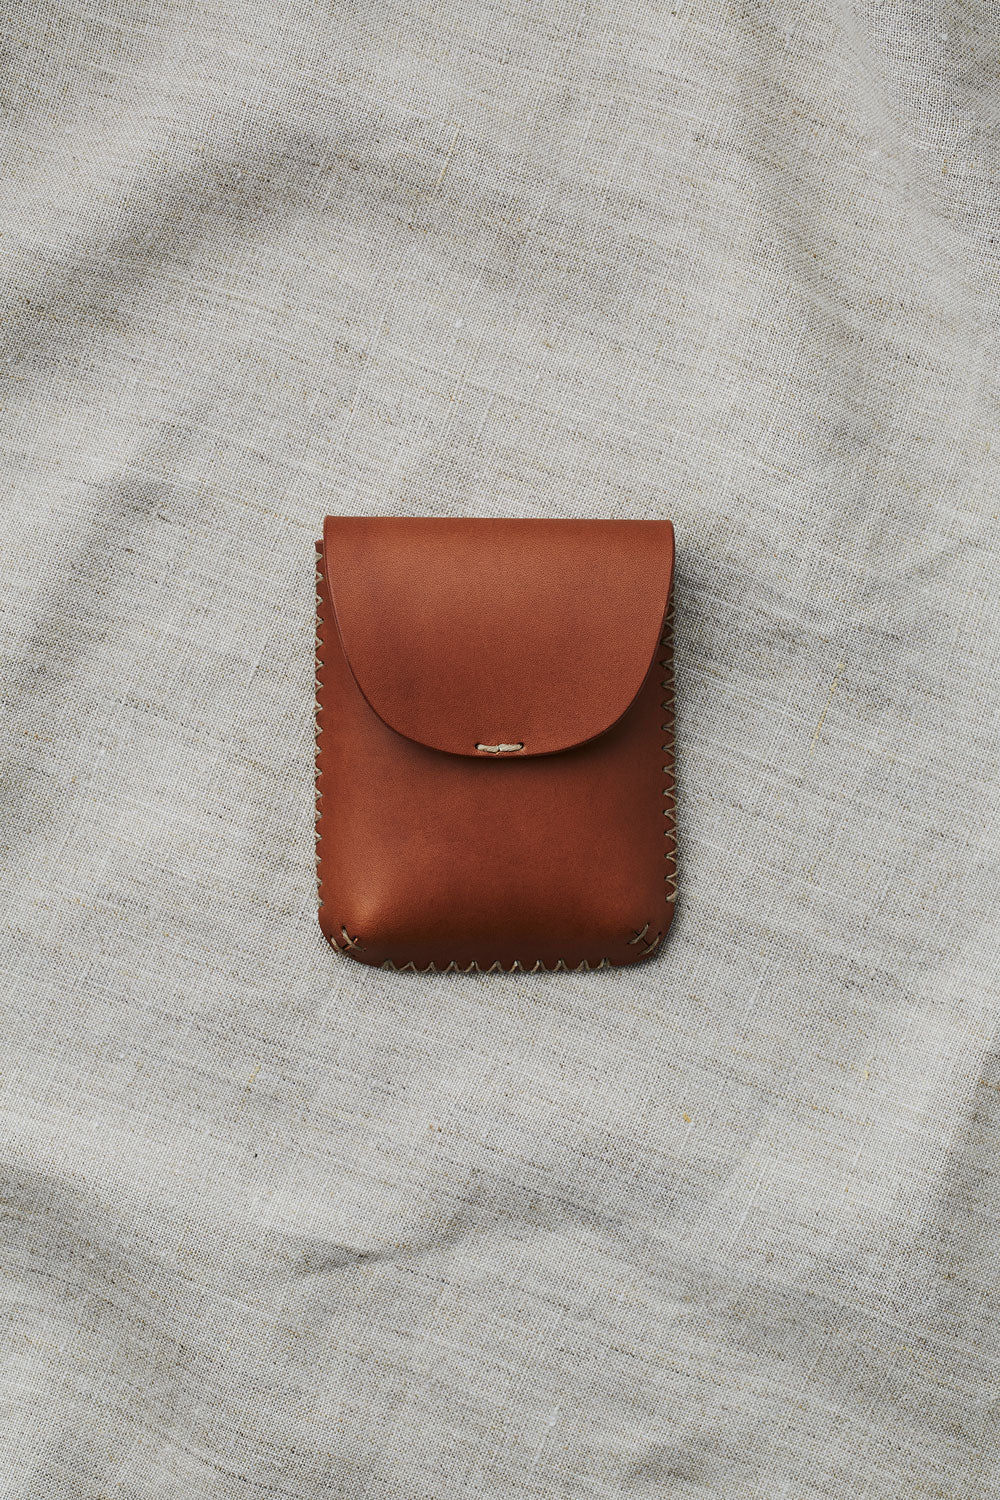 roots 根 / card case